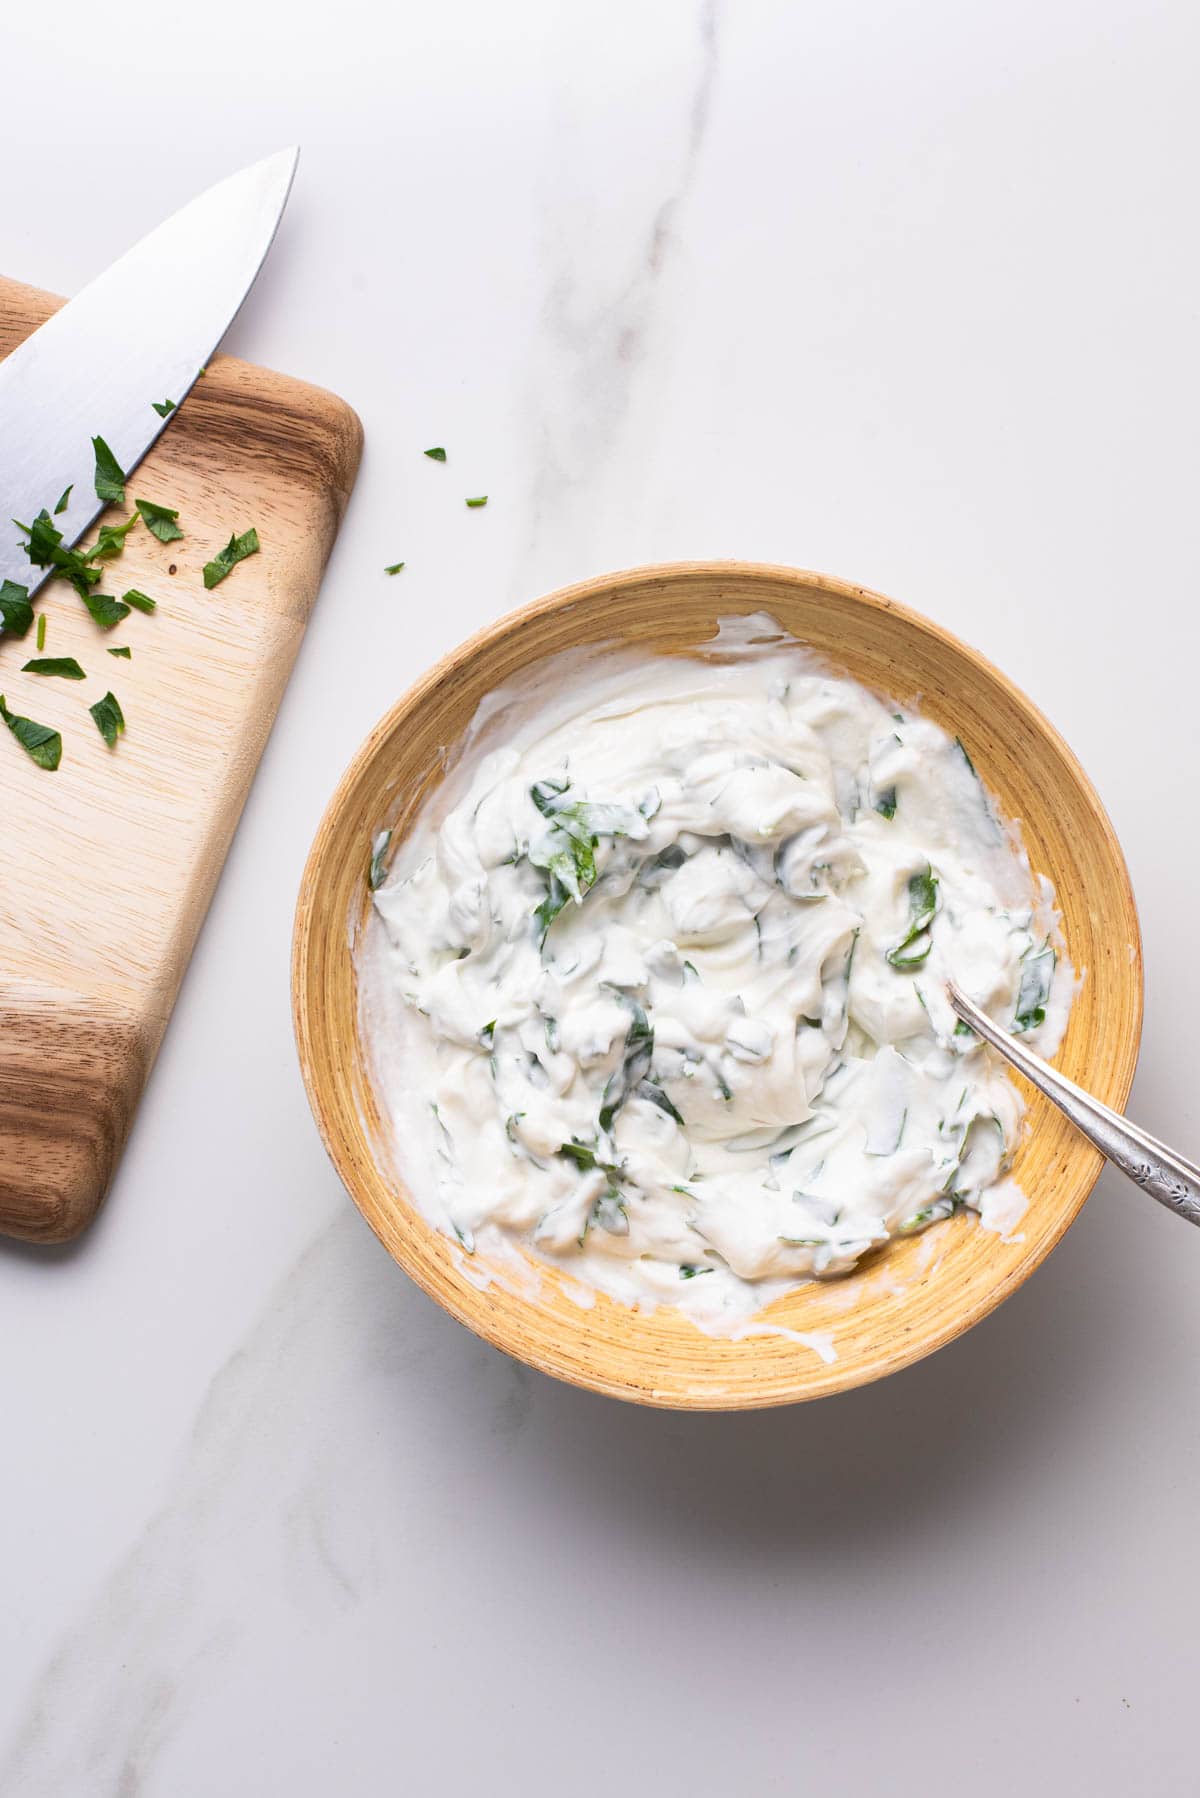 Spiced yogurt sauce with herbs in a wooden bowl.